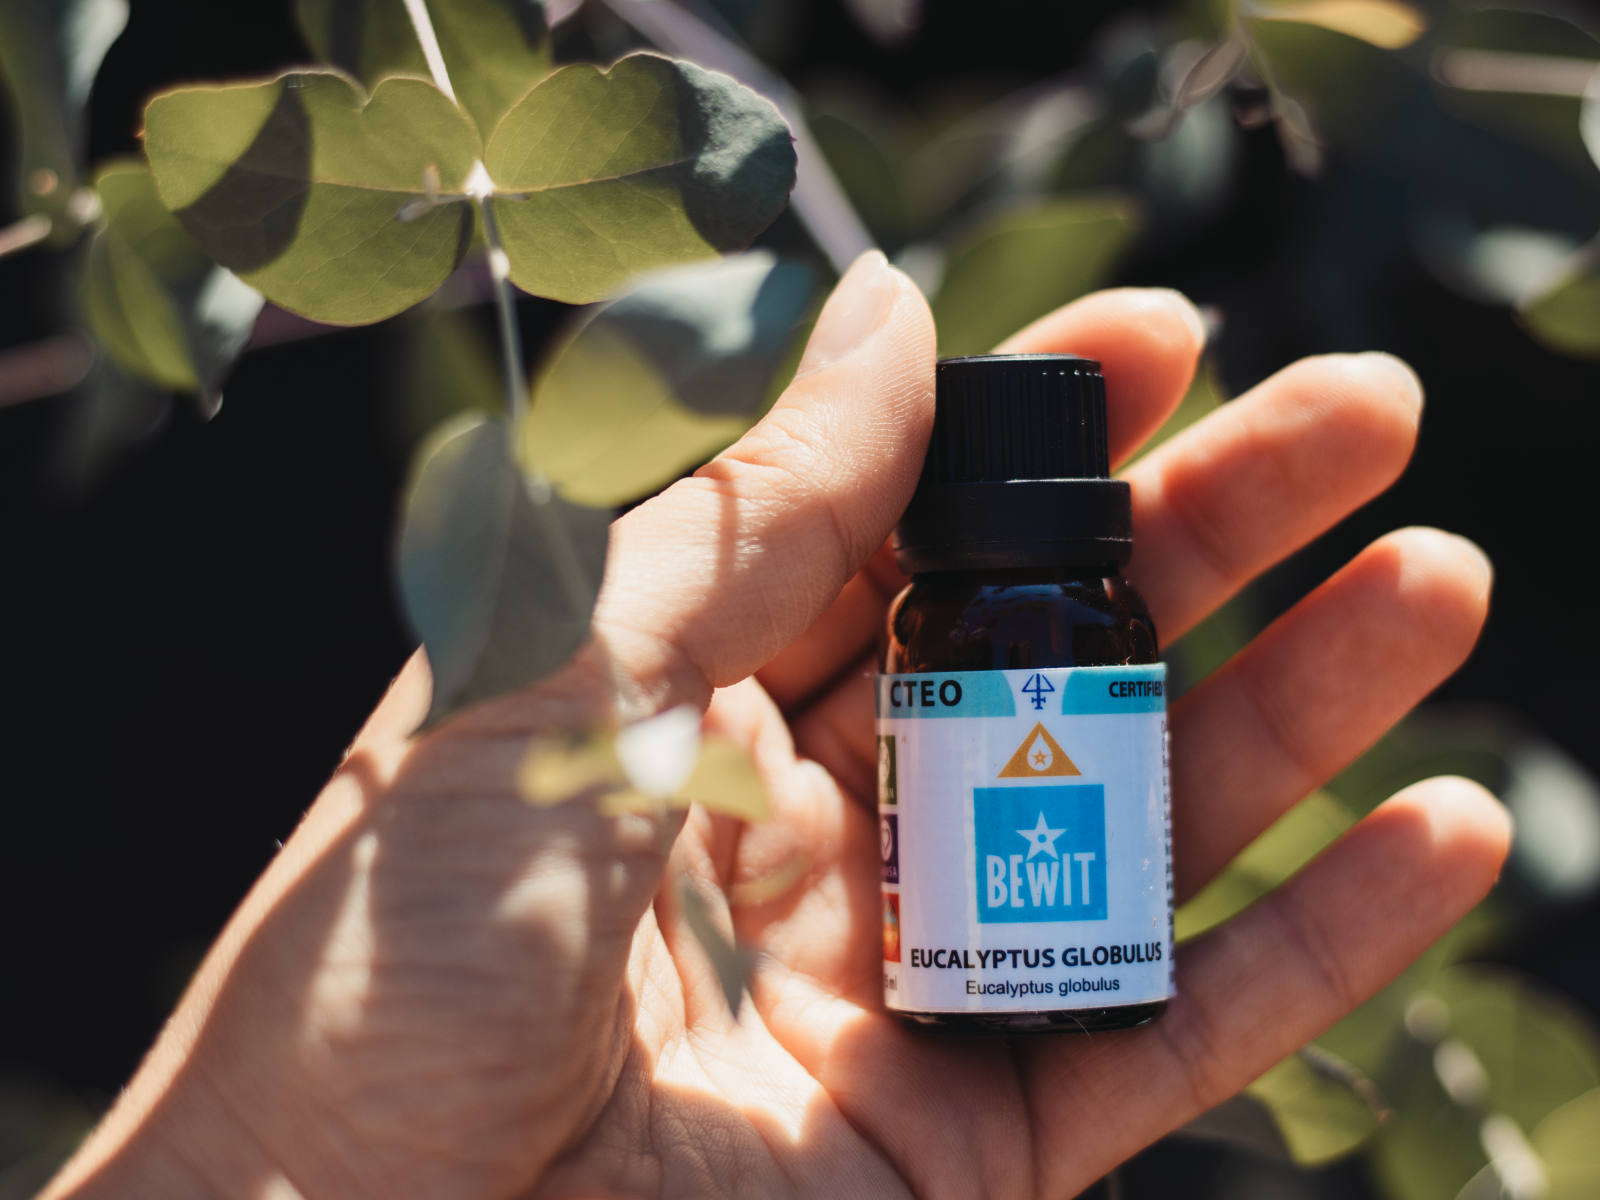 BEWIT Eucalyptus globulus - This is a 100% pure essential oil - 8